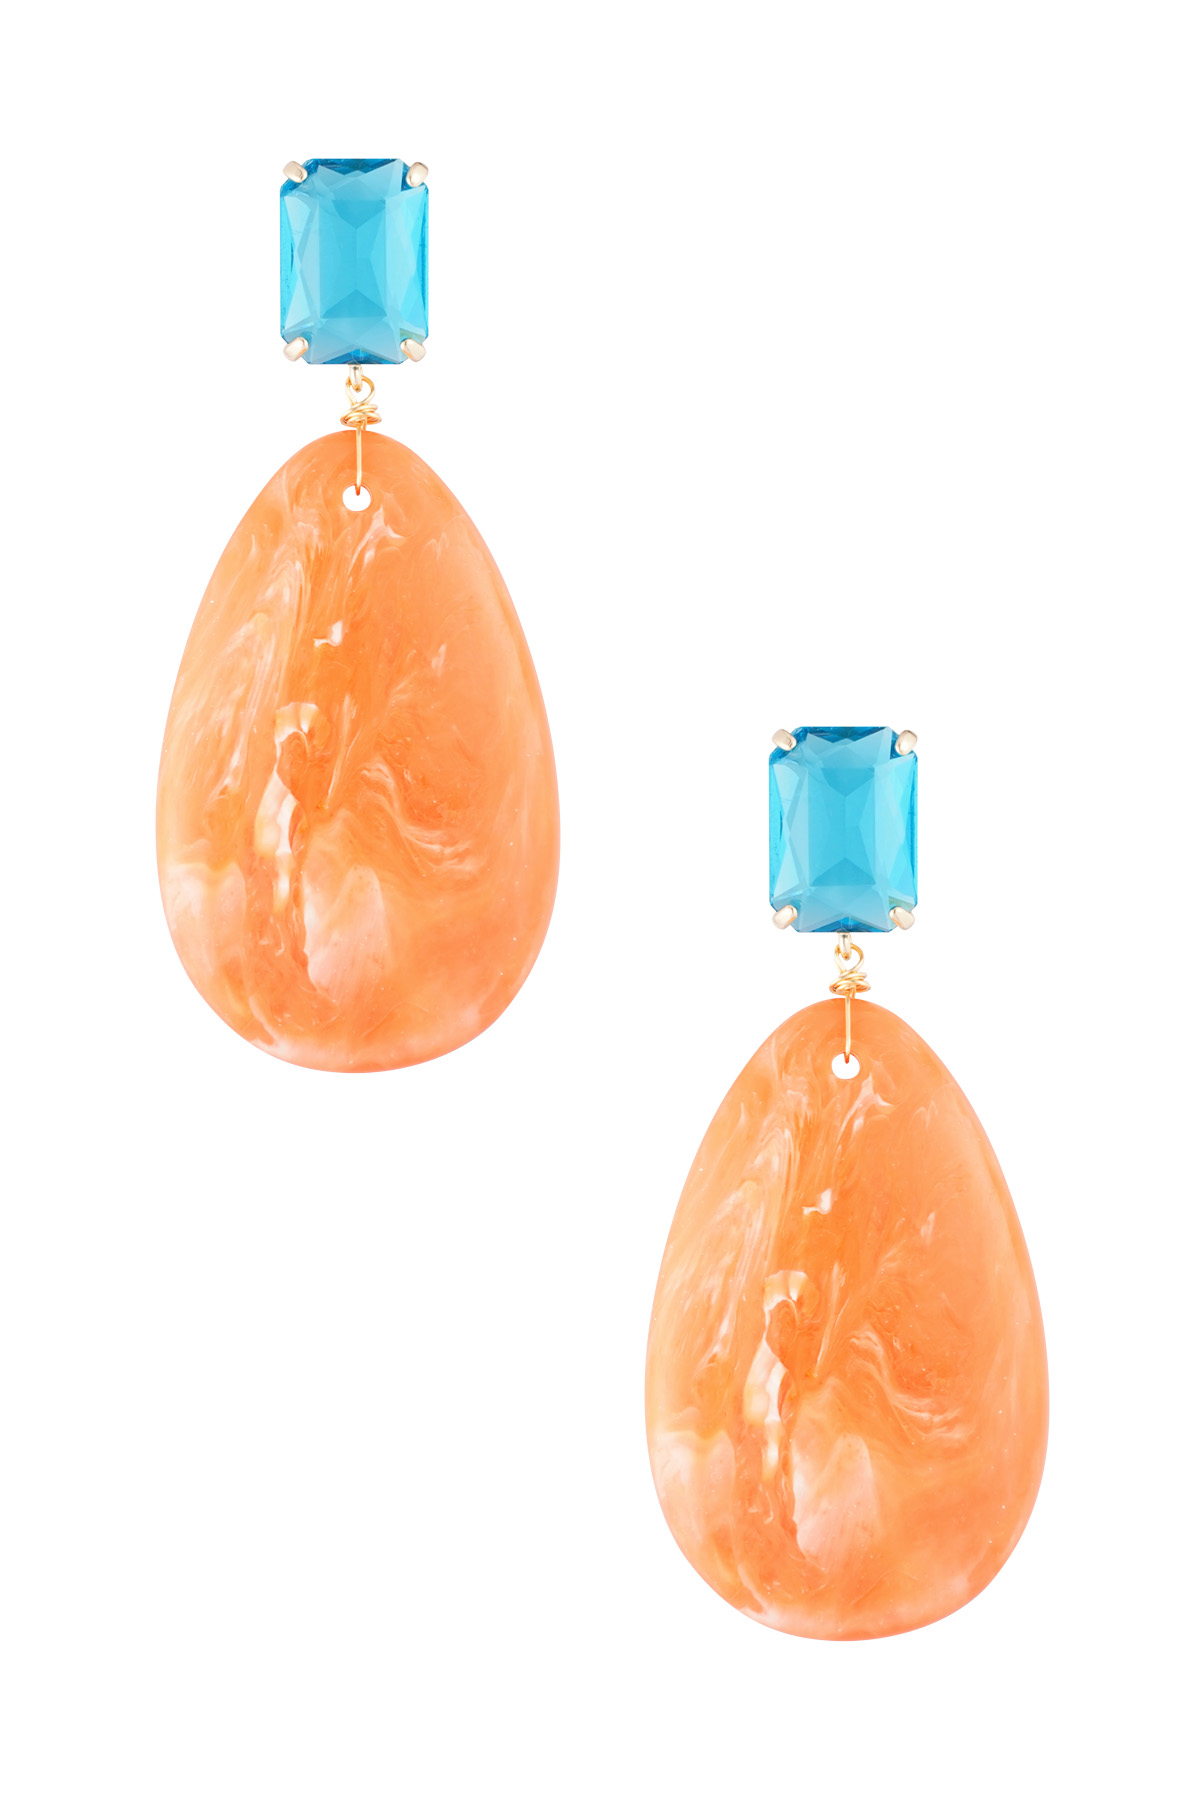 glass earrings with oval stone - orange 